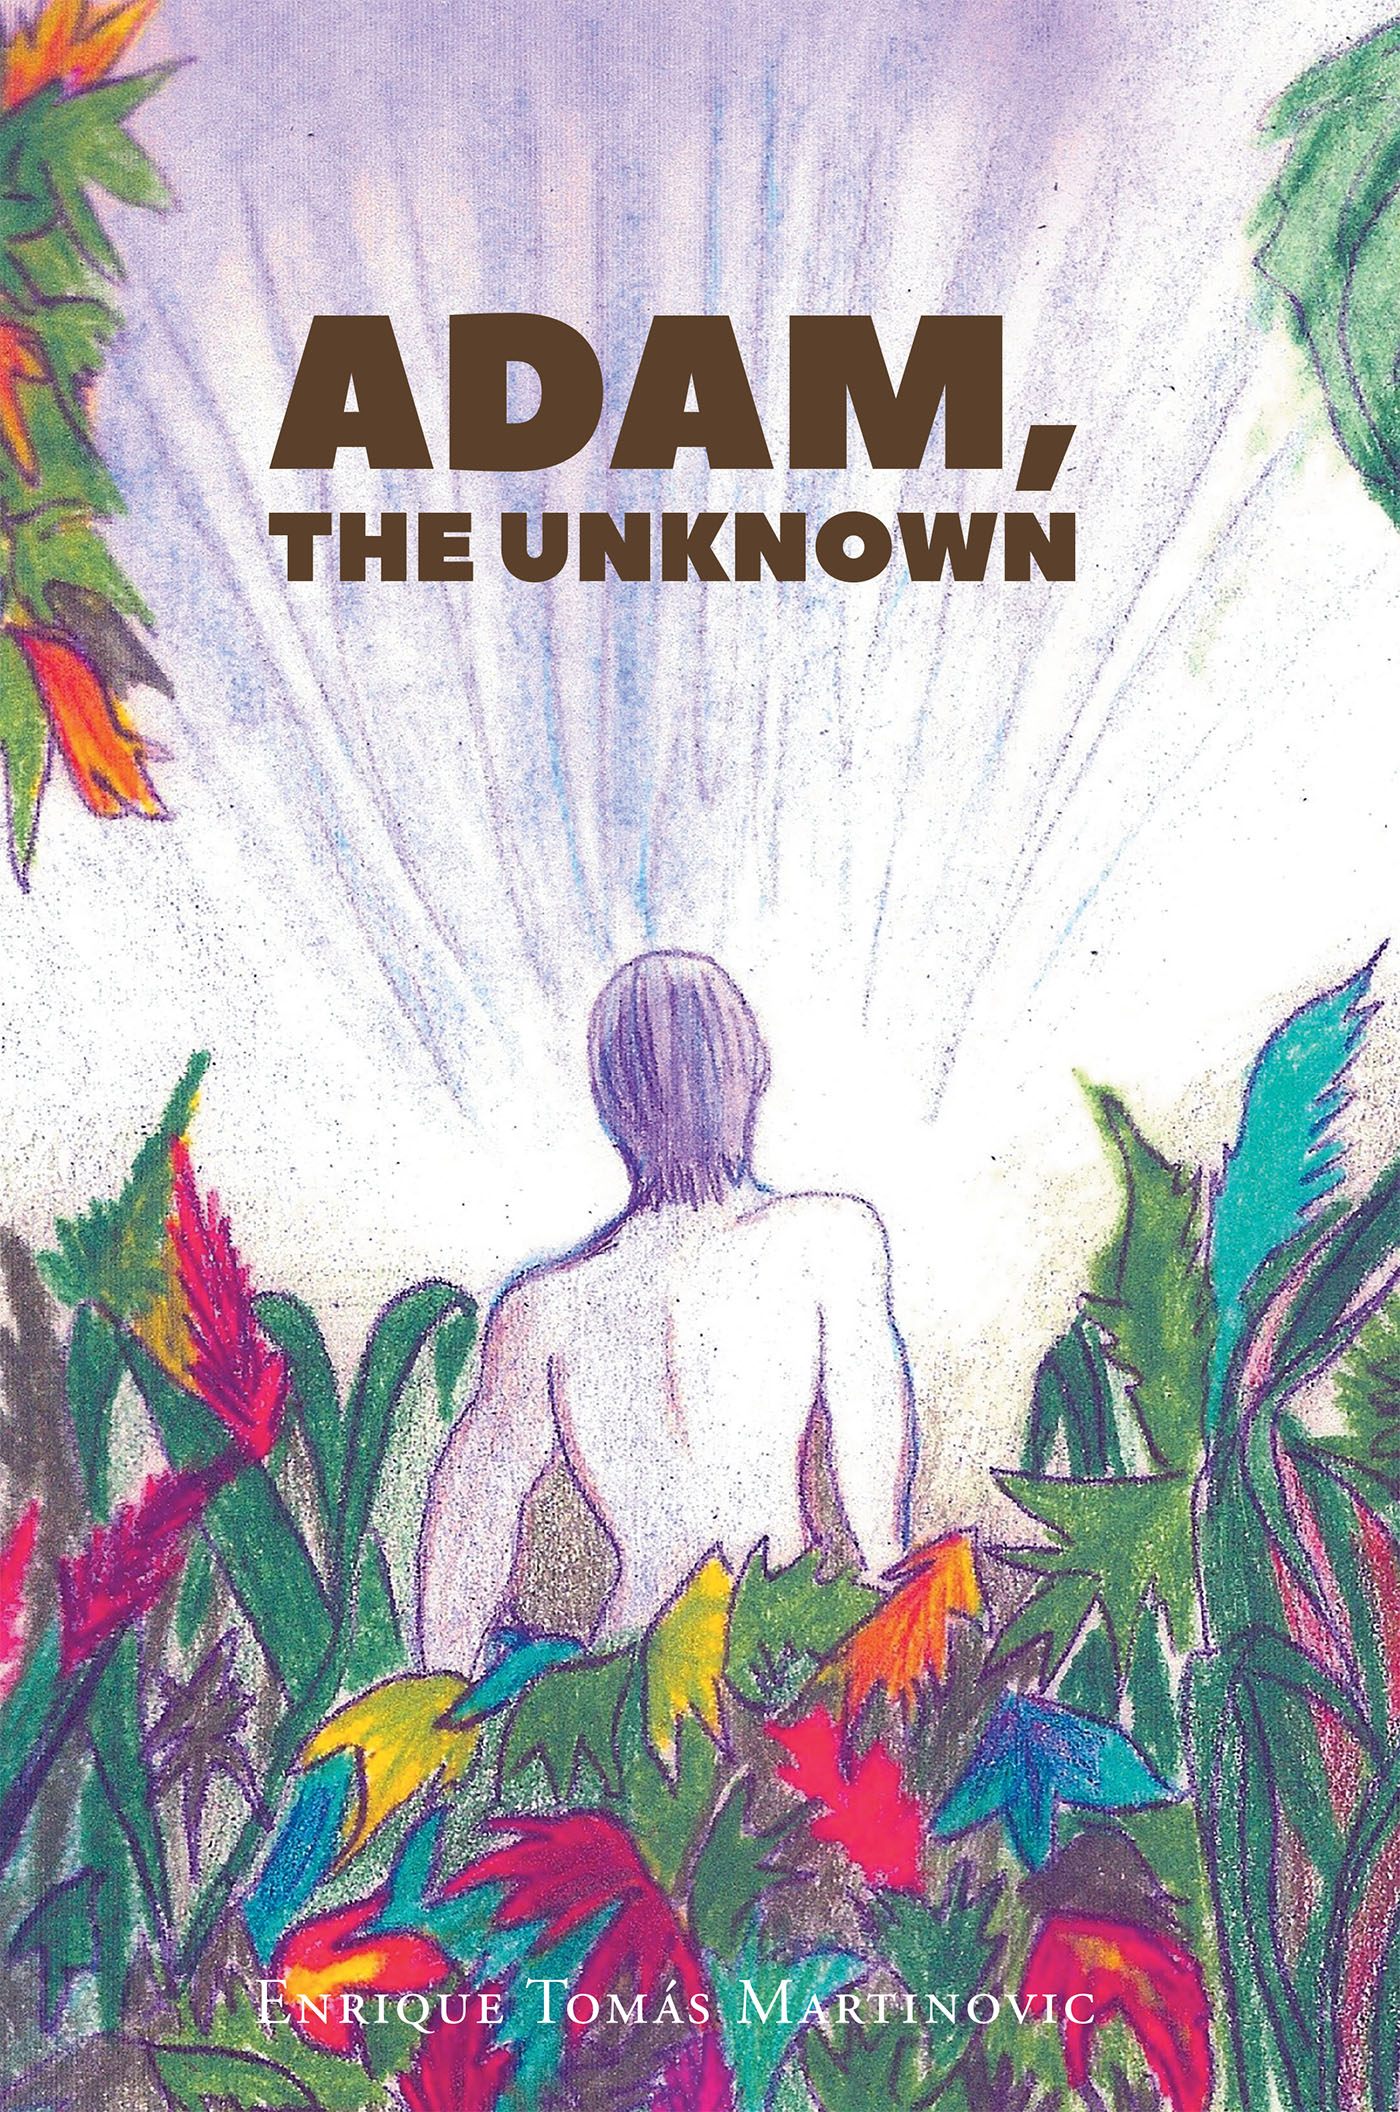 Enrique Tomás Martinovic’s Newly Released "Adam, the Unknown" is an Informative Study of the Life Experiences of Adam